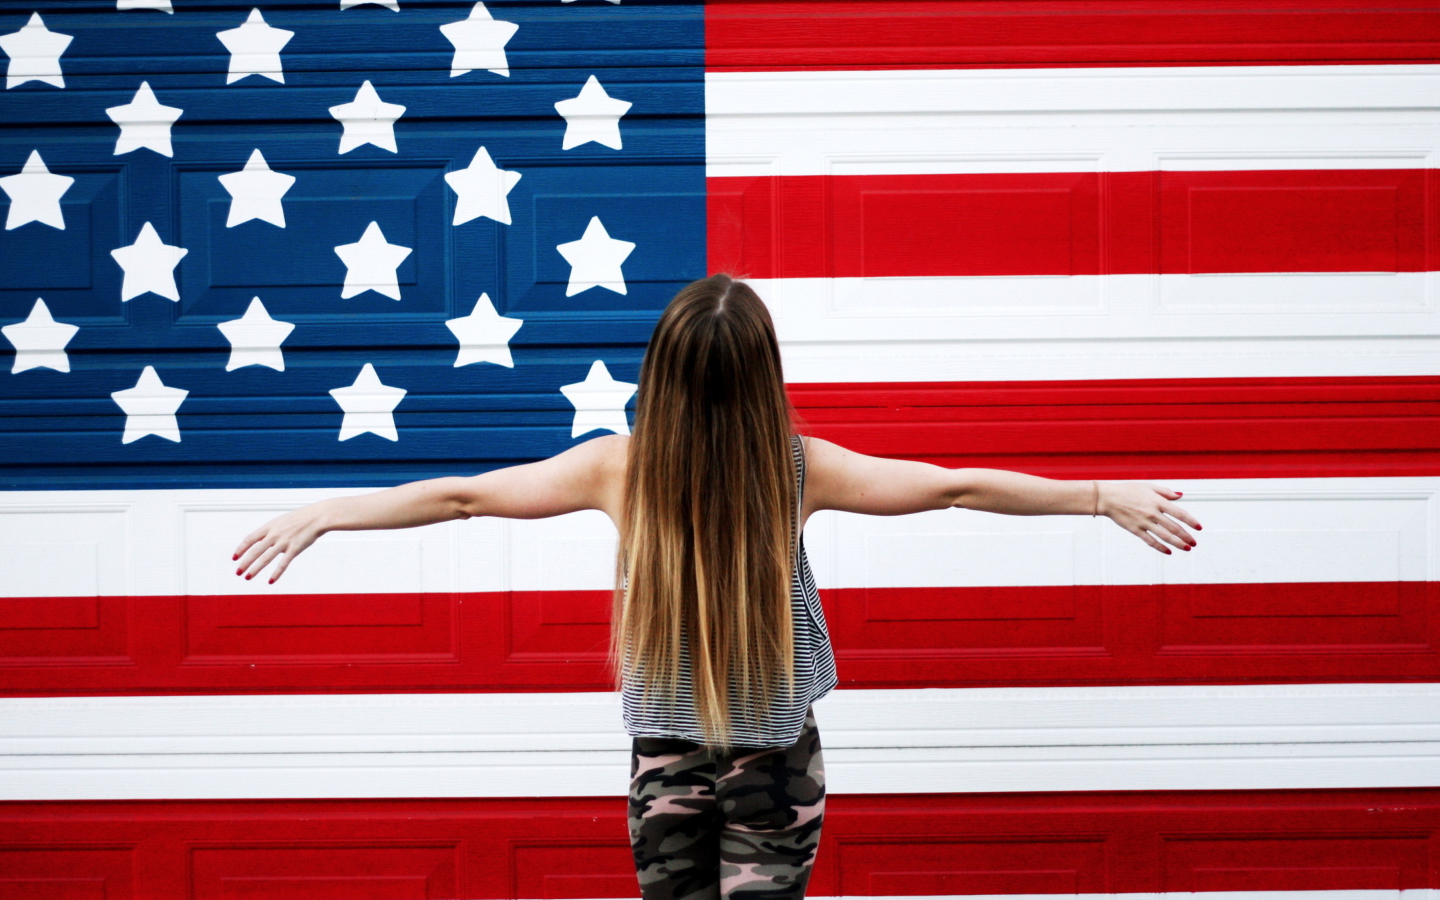 Das American Girl In Front Of USA Flag Wallpaper 1440x900